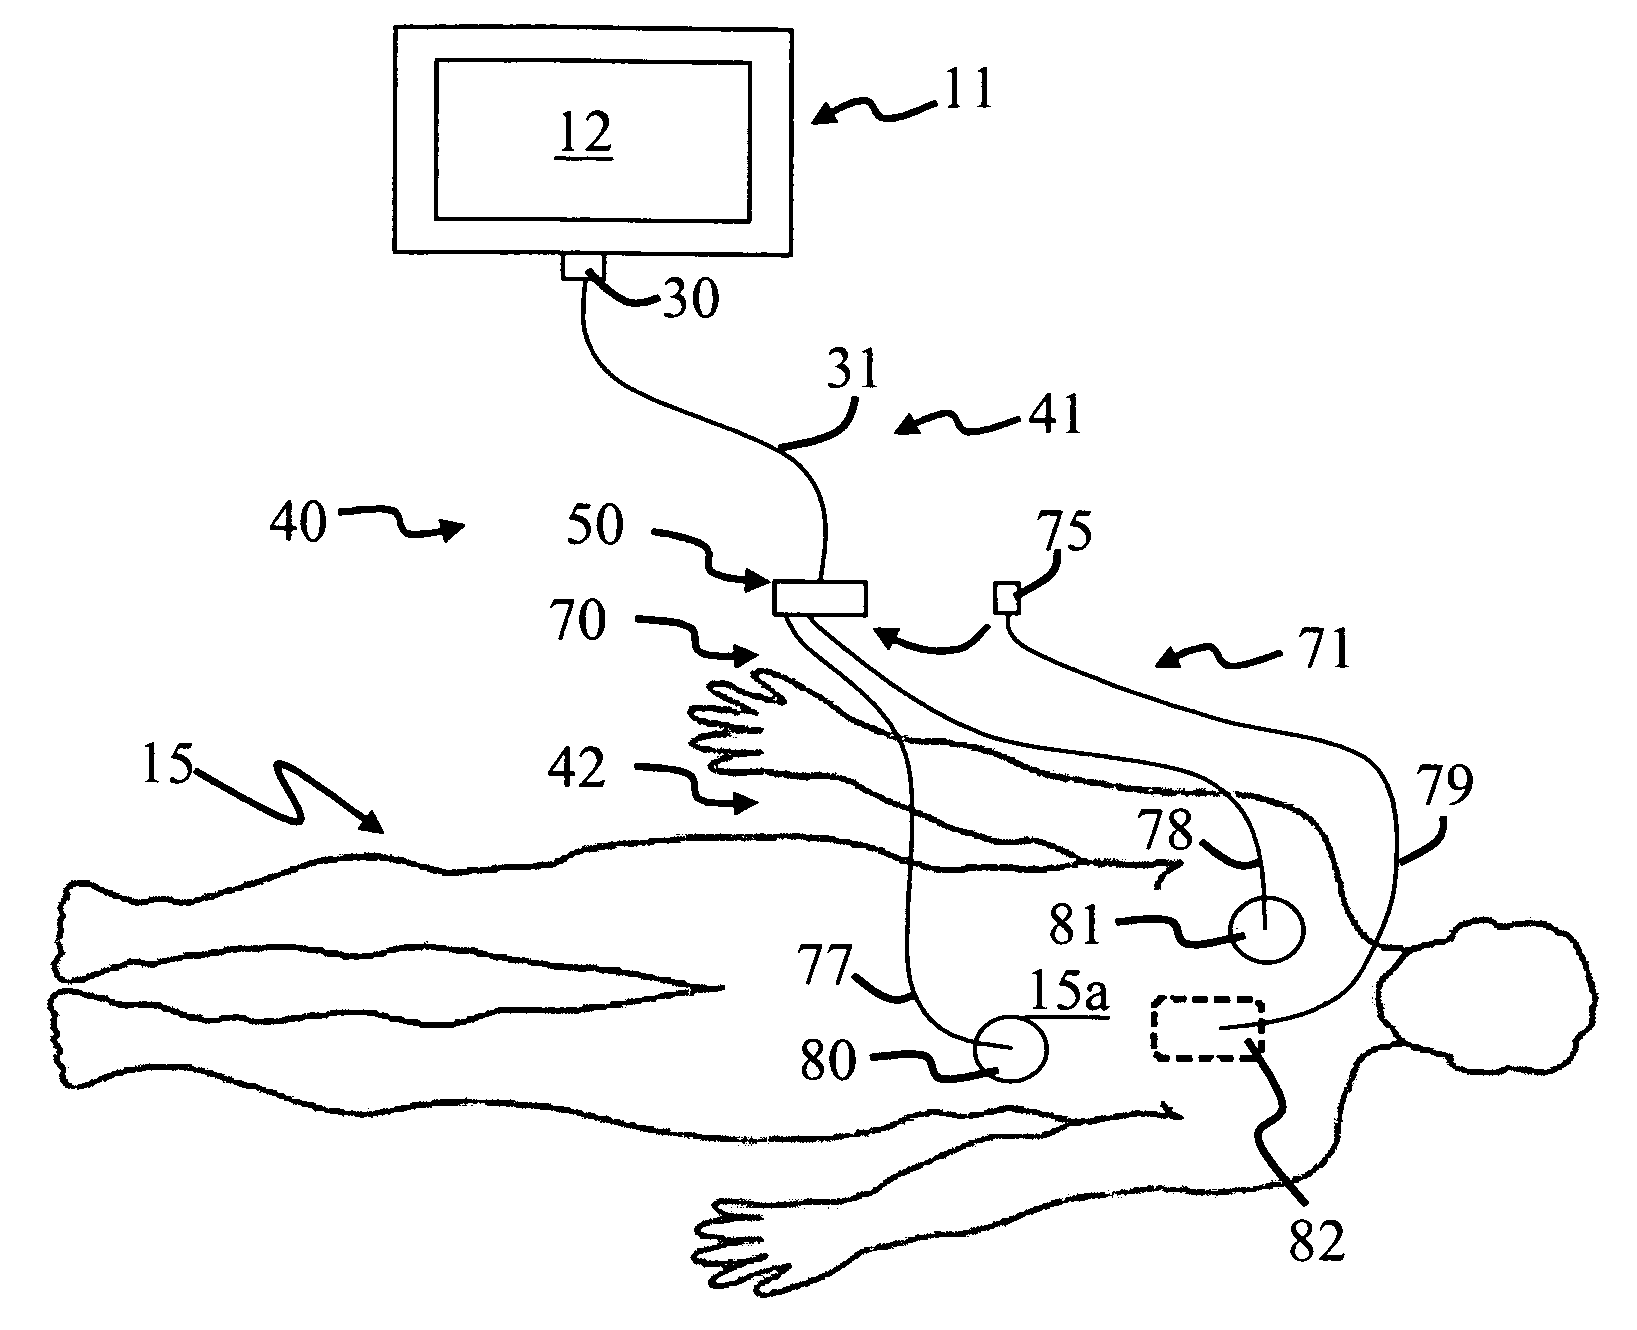 Electrode system for a physiological stimulator